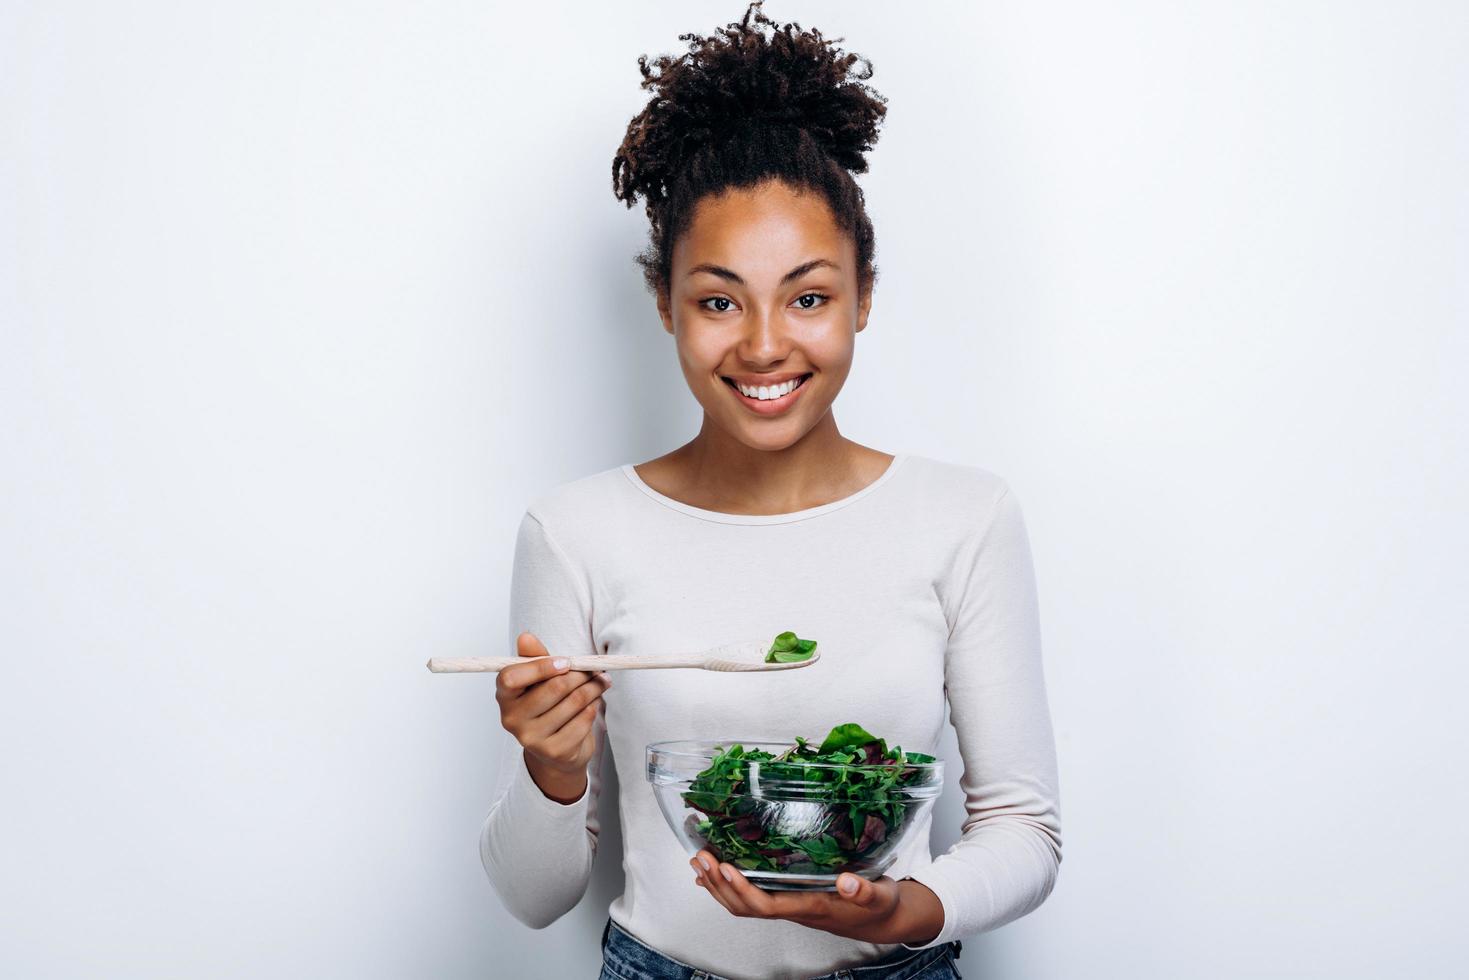 The girl poses with a homemade dish in the center on a white wall photo